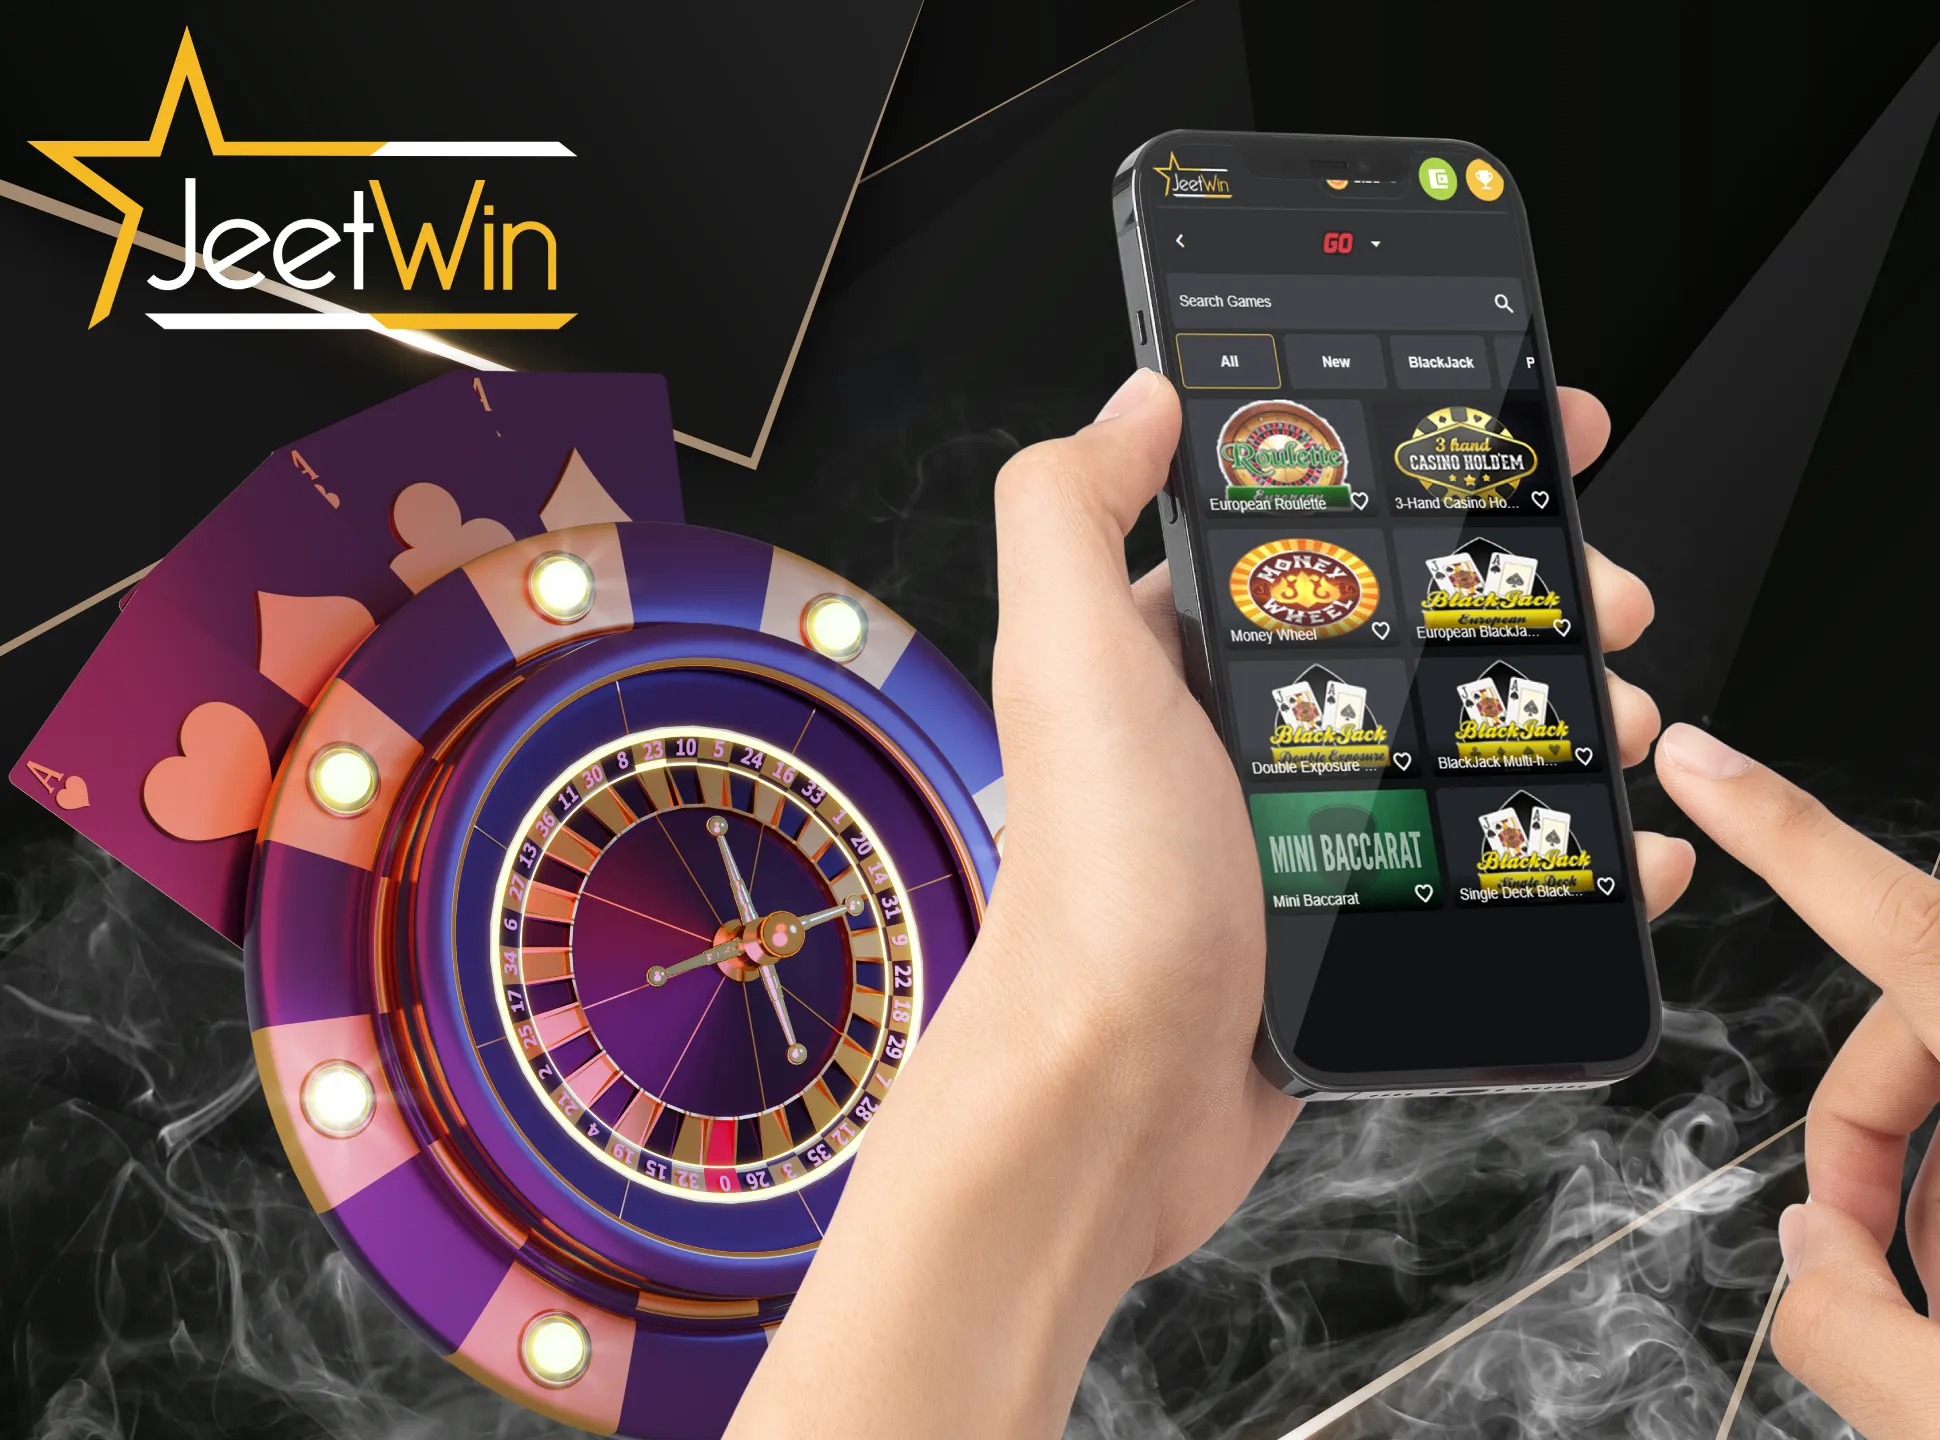 Check out the Table Games section of the JeetWin app.